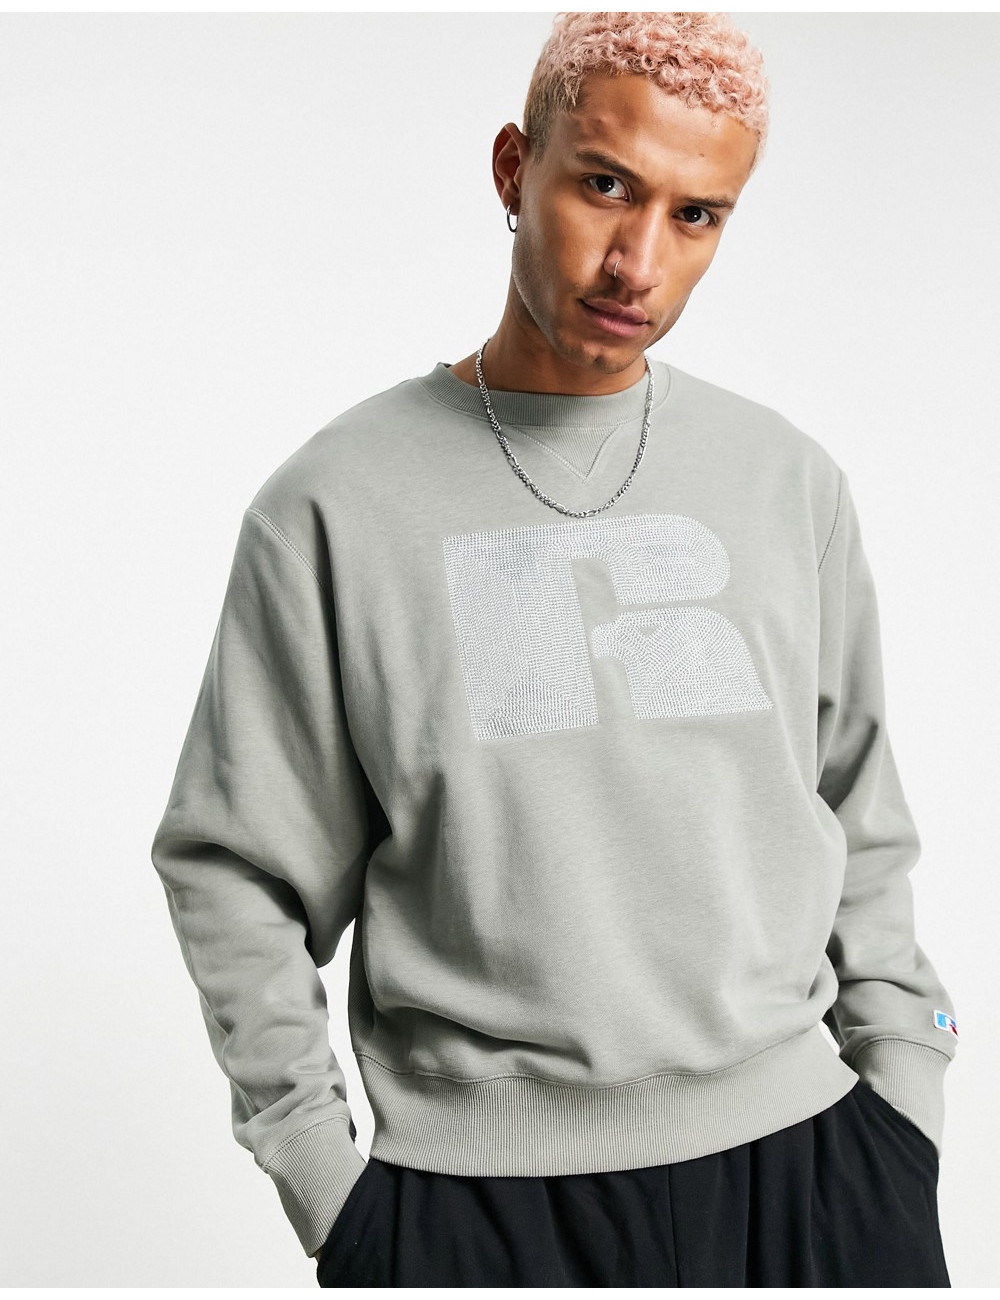 Russell Athletic crew neck...